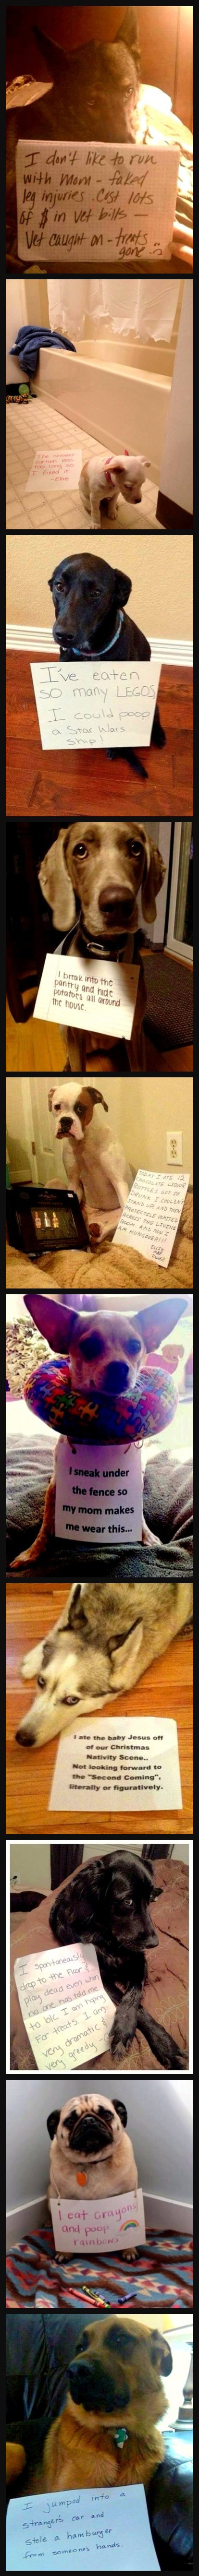 10 Hilarious Dog Shaming Pictures